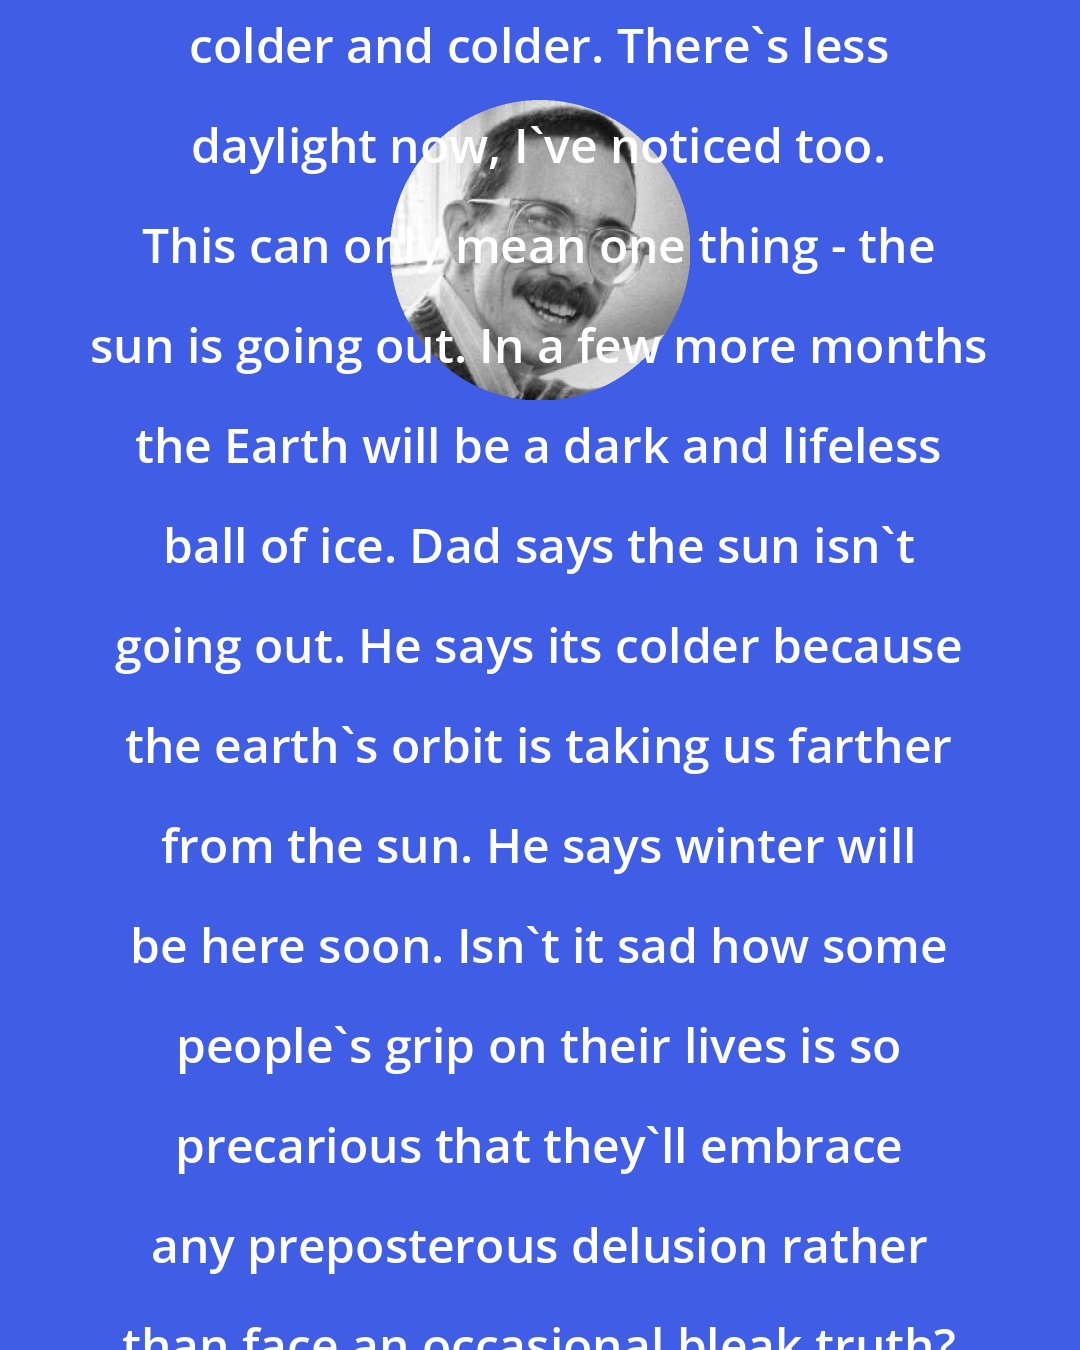 Bill Watterson: Since September it's just gotten colder and colder. There's less daylight now, I've noticed too. This can only mean one thing - the sun is going out. In a few more months the Earth will be a dark and lifeless ball of ice. Dad says the sun isn't going out. He says its colder because the earth's orbit is taking us farther from the sun. He says winter will be here soon. Isn't it sad how some people's grip on their lives is so precarious that they'll embrace any preposterous delusion rather than face an occasional bleak truth?